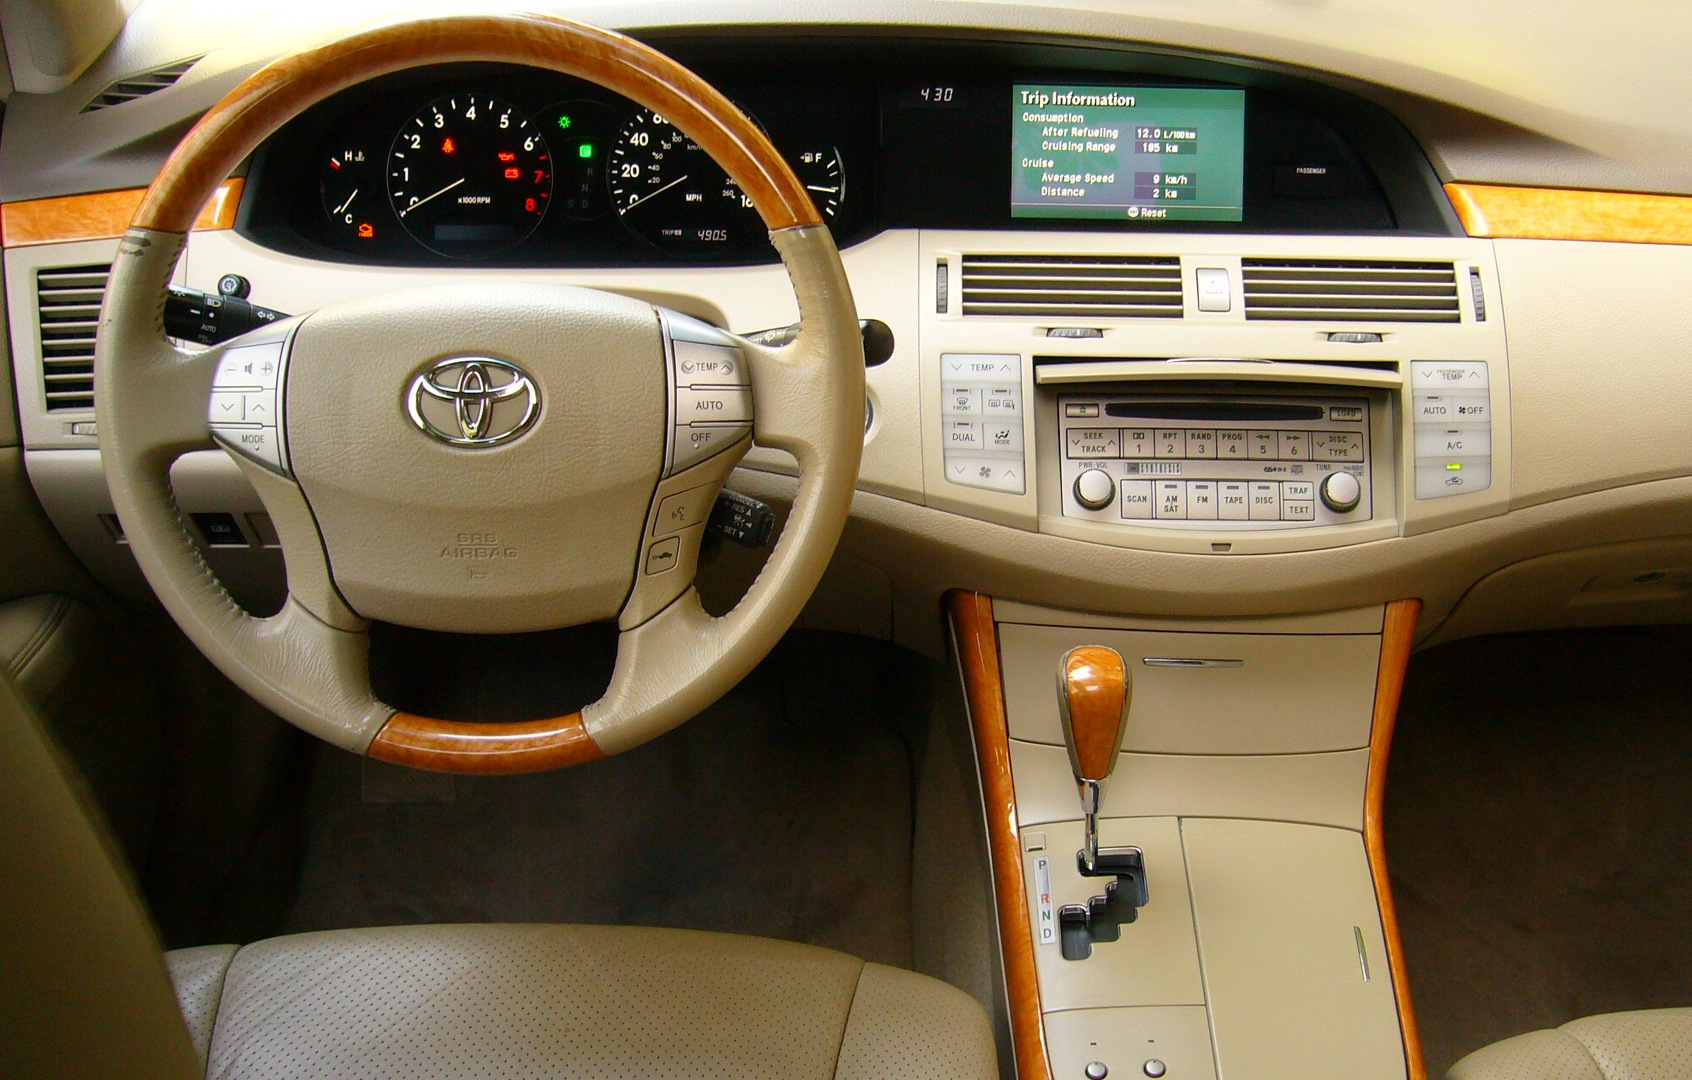 The result of painting the panels of the center console  - Toyota Avalon 35 L 2007